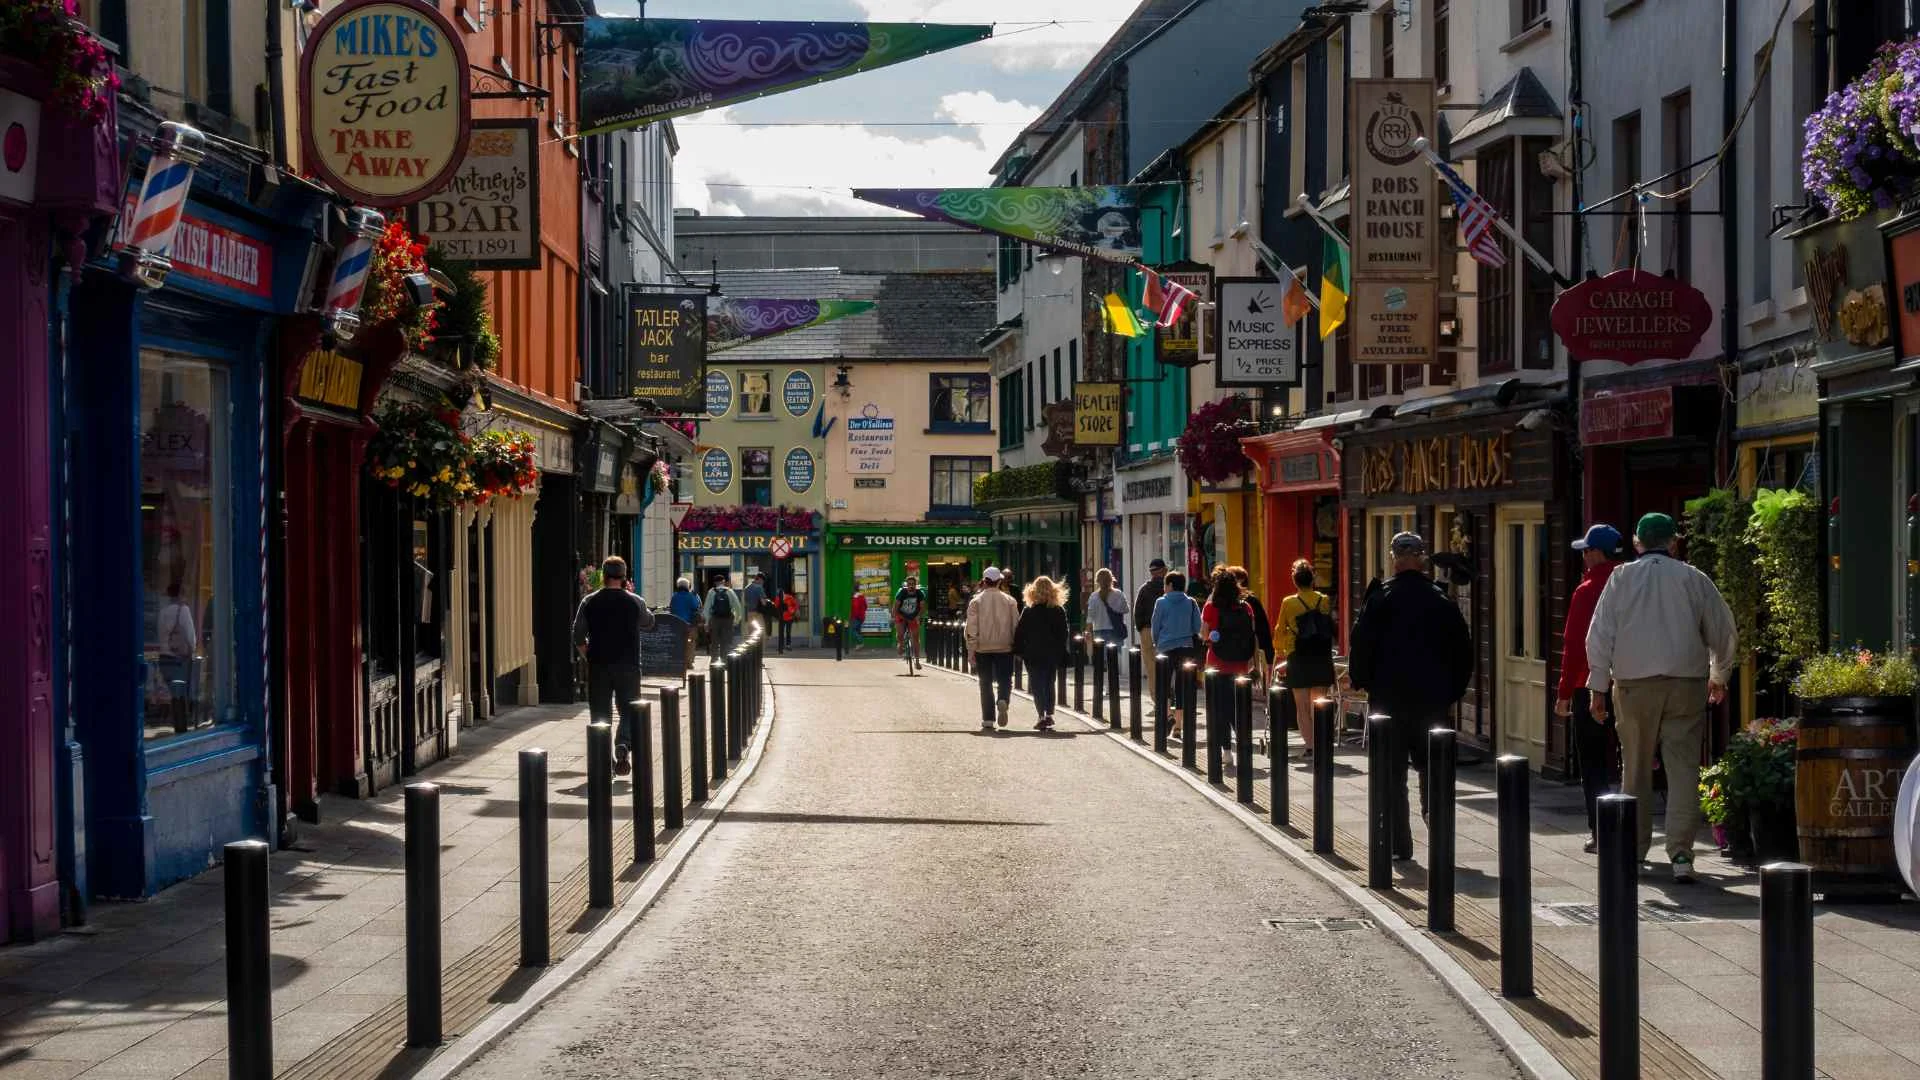 Stock image of a Kilkenny street with restaurants in Ireland from Canva Pro